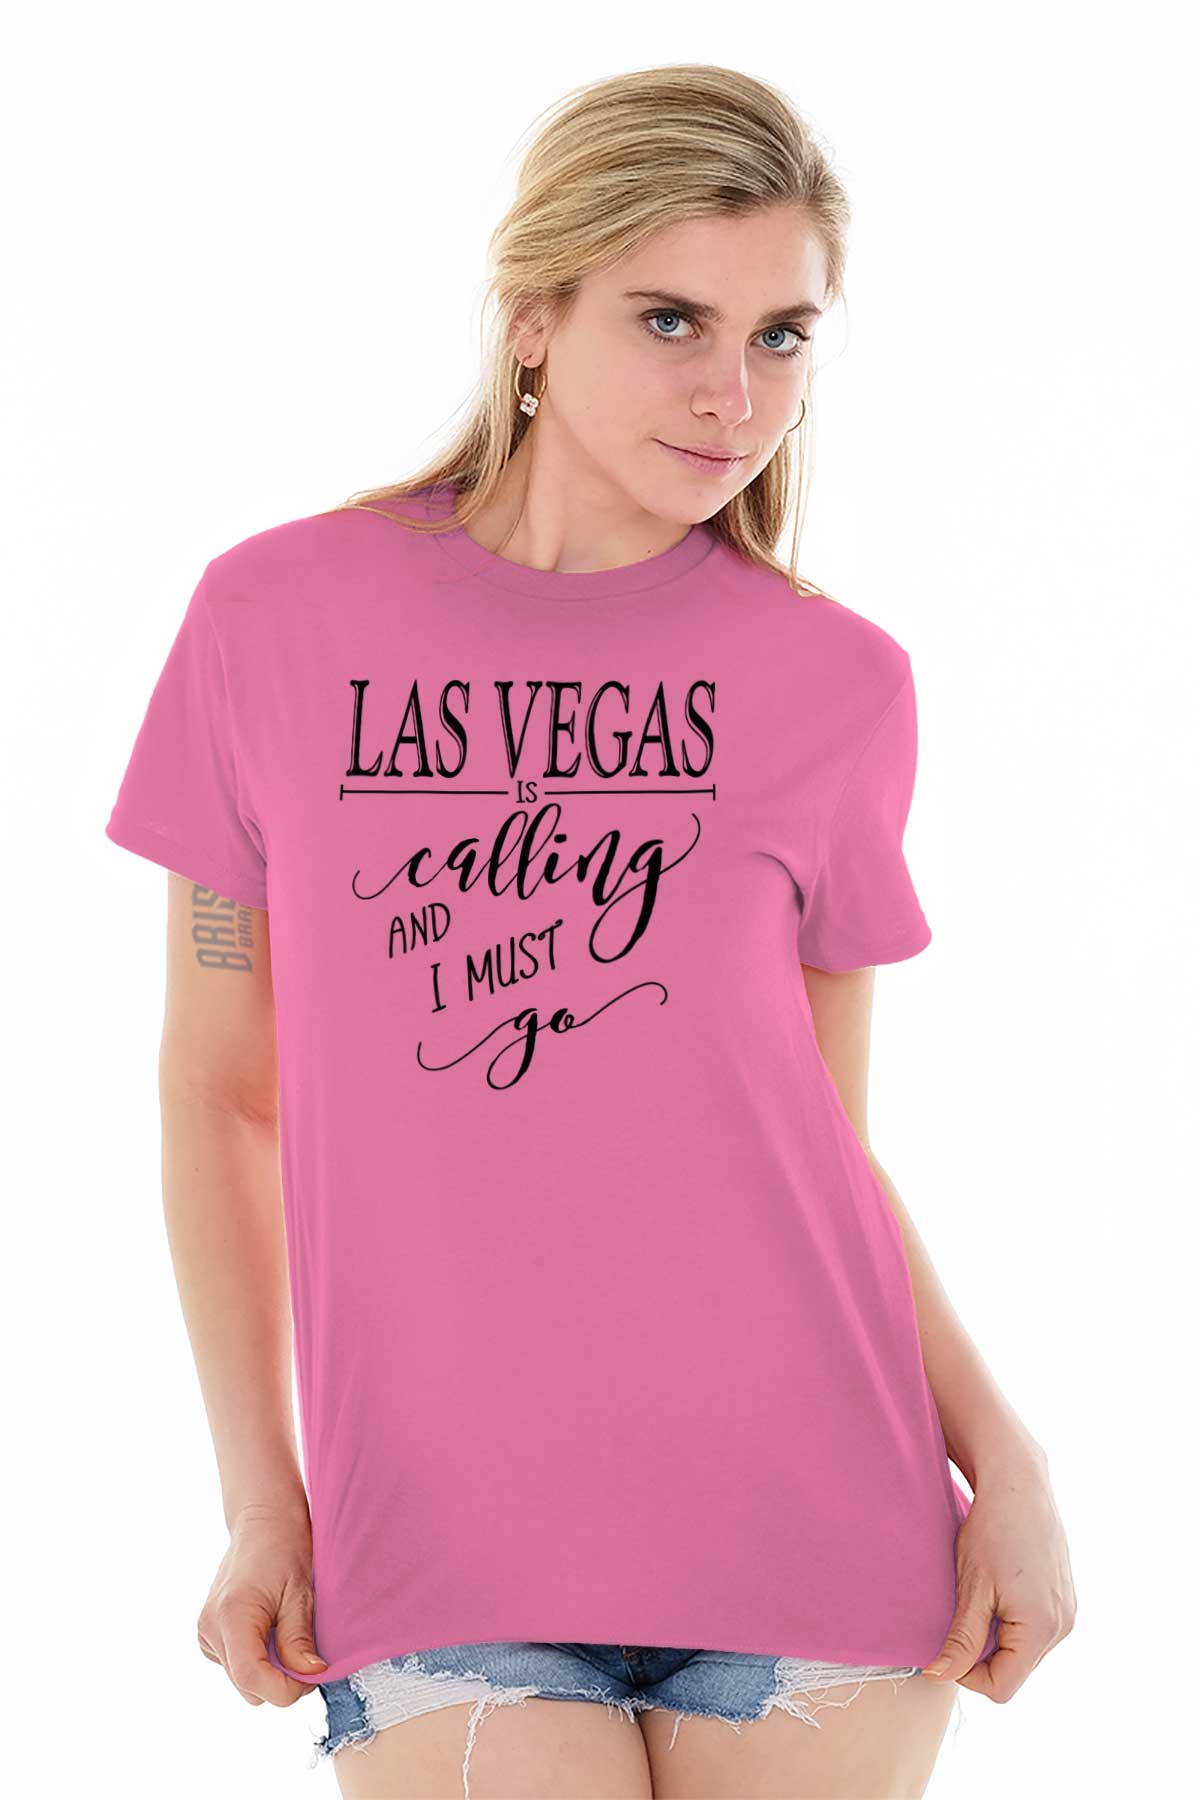 Las Vegas is Calling I Must Go Women's Graphic T Shirt Tees Brisco Brands M - image 3 of 6